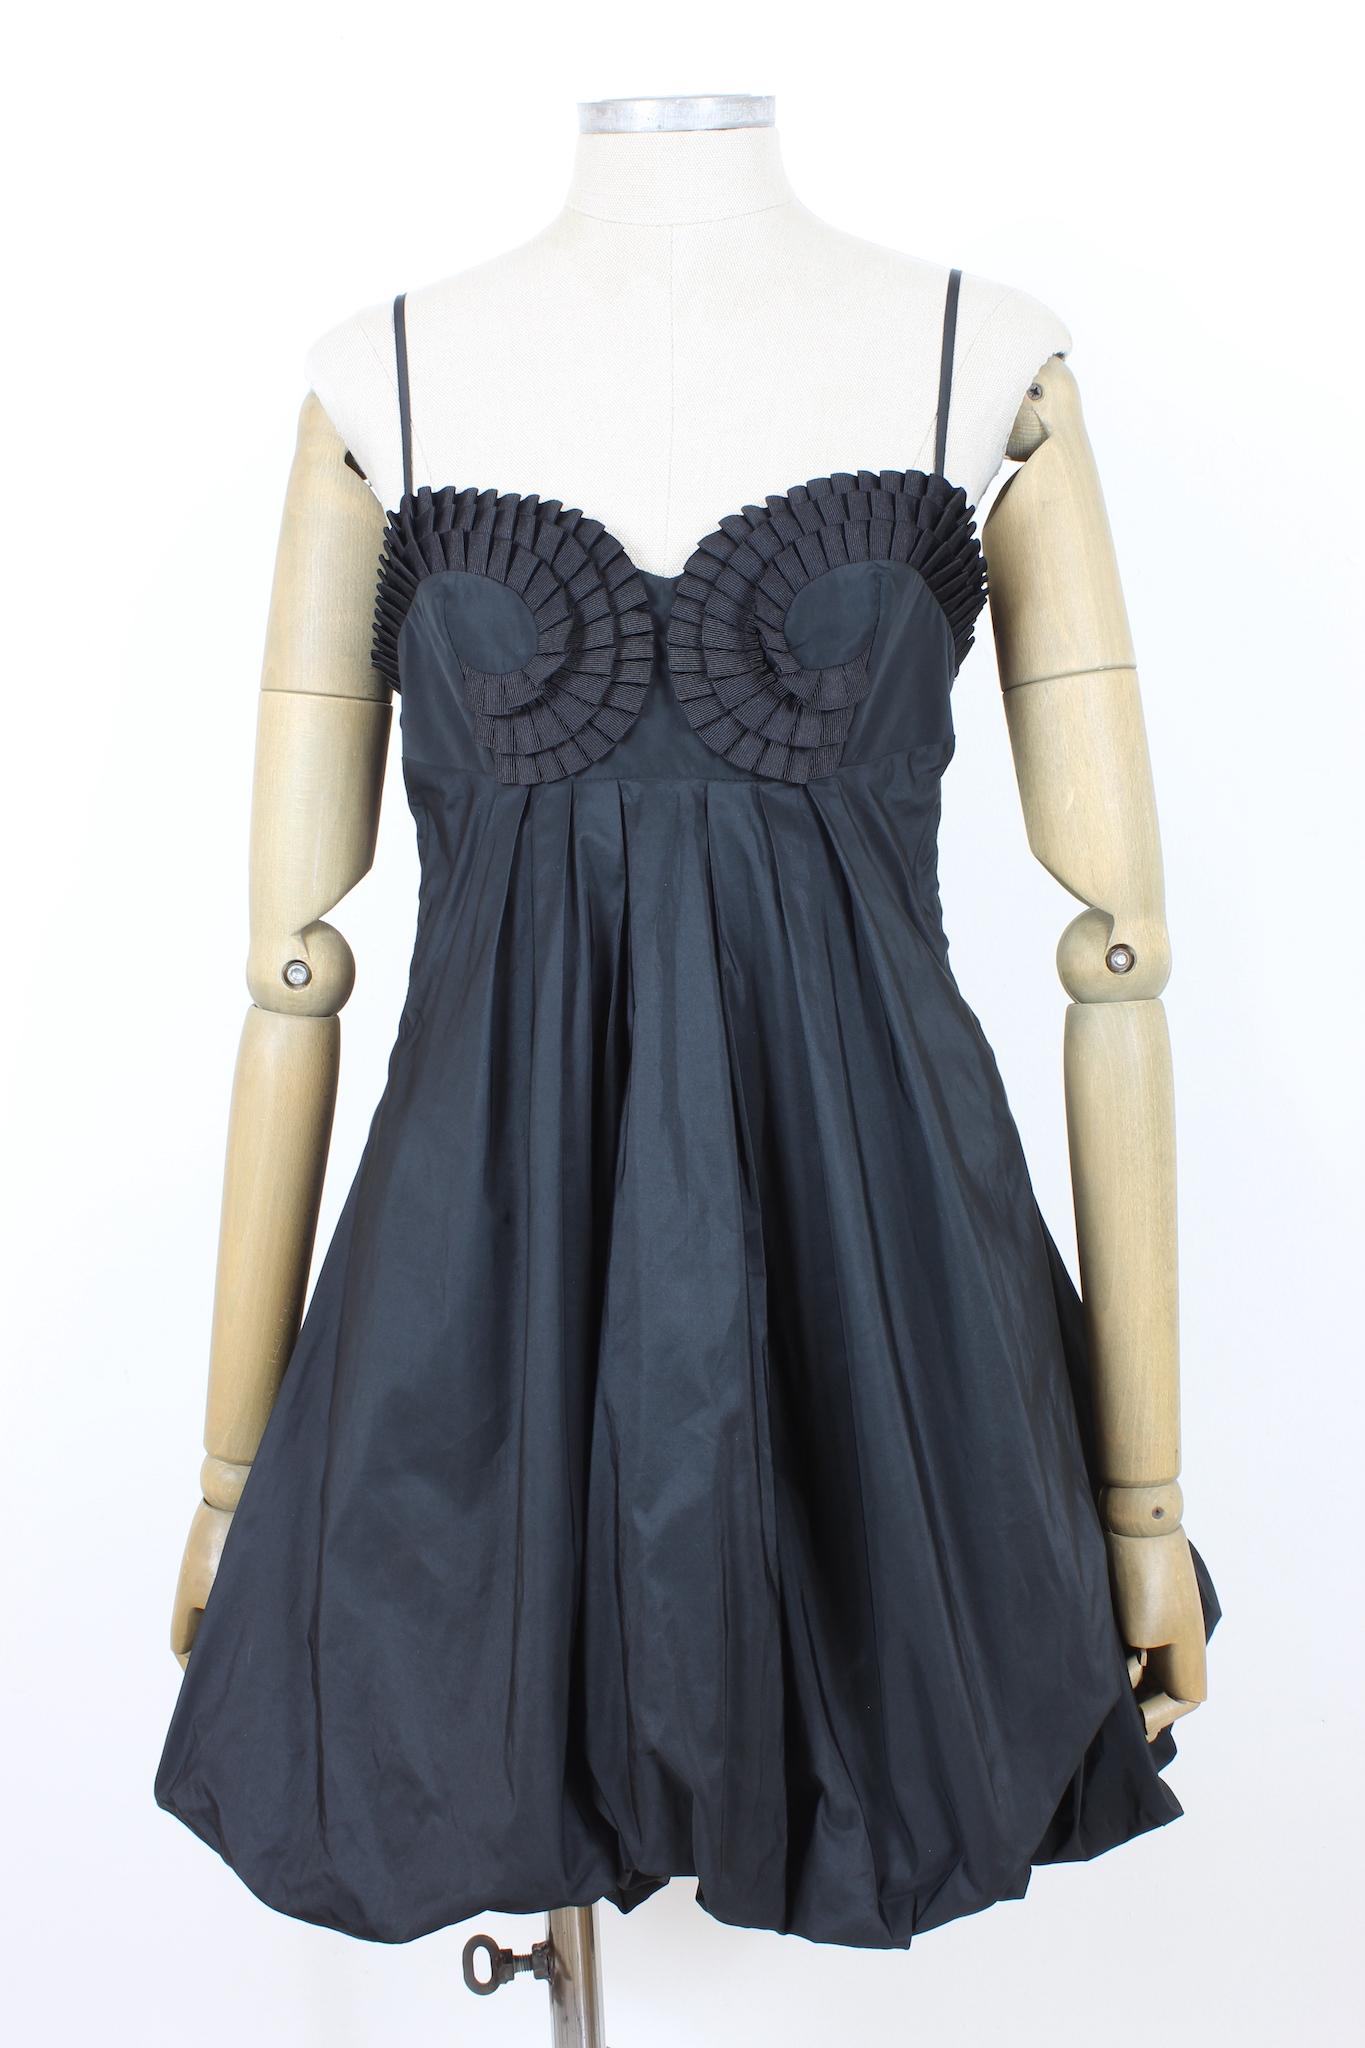 Cavalli 2000s black satin evening dress. Elegant dress suitable for a special event, it has a flared silhouette with a balloon skirt and ruffles on the chest. The length is above the knee, satin fabric. Made in Italy.

Size: 44 It 10 Us 12